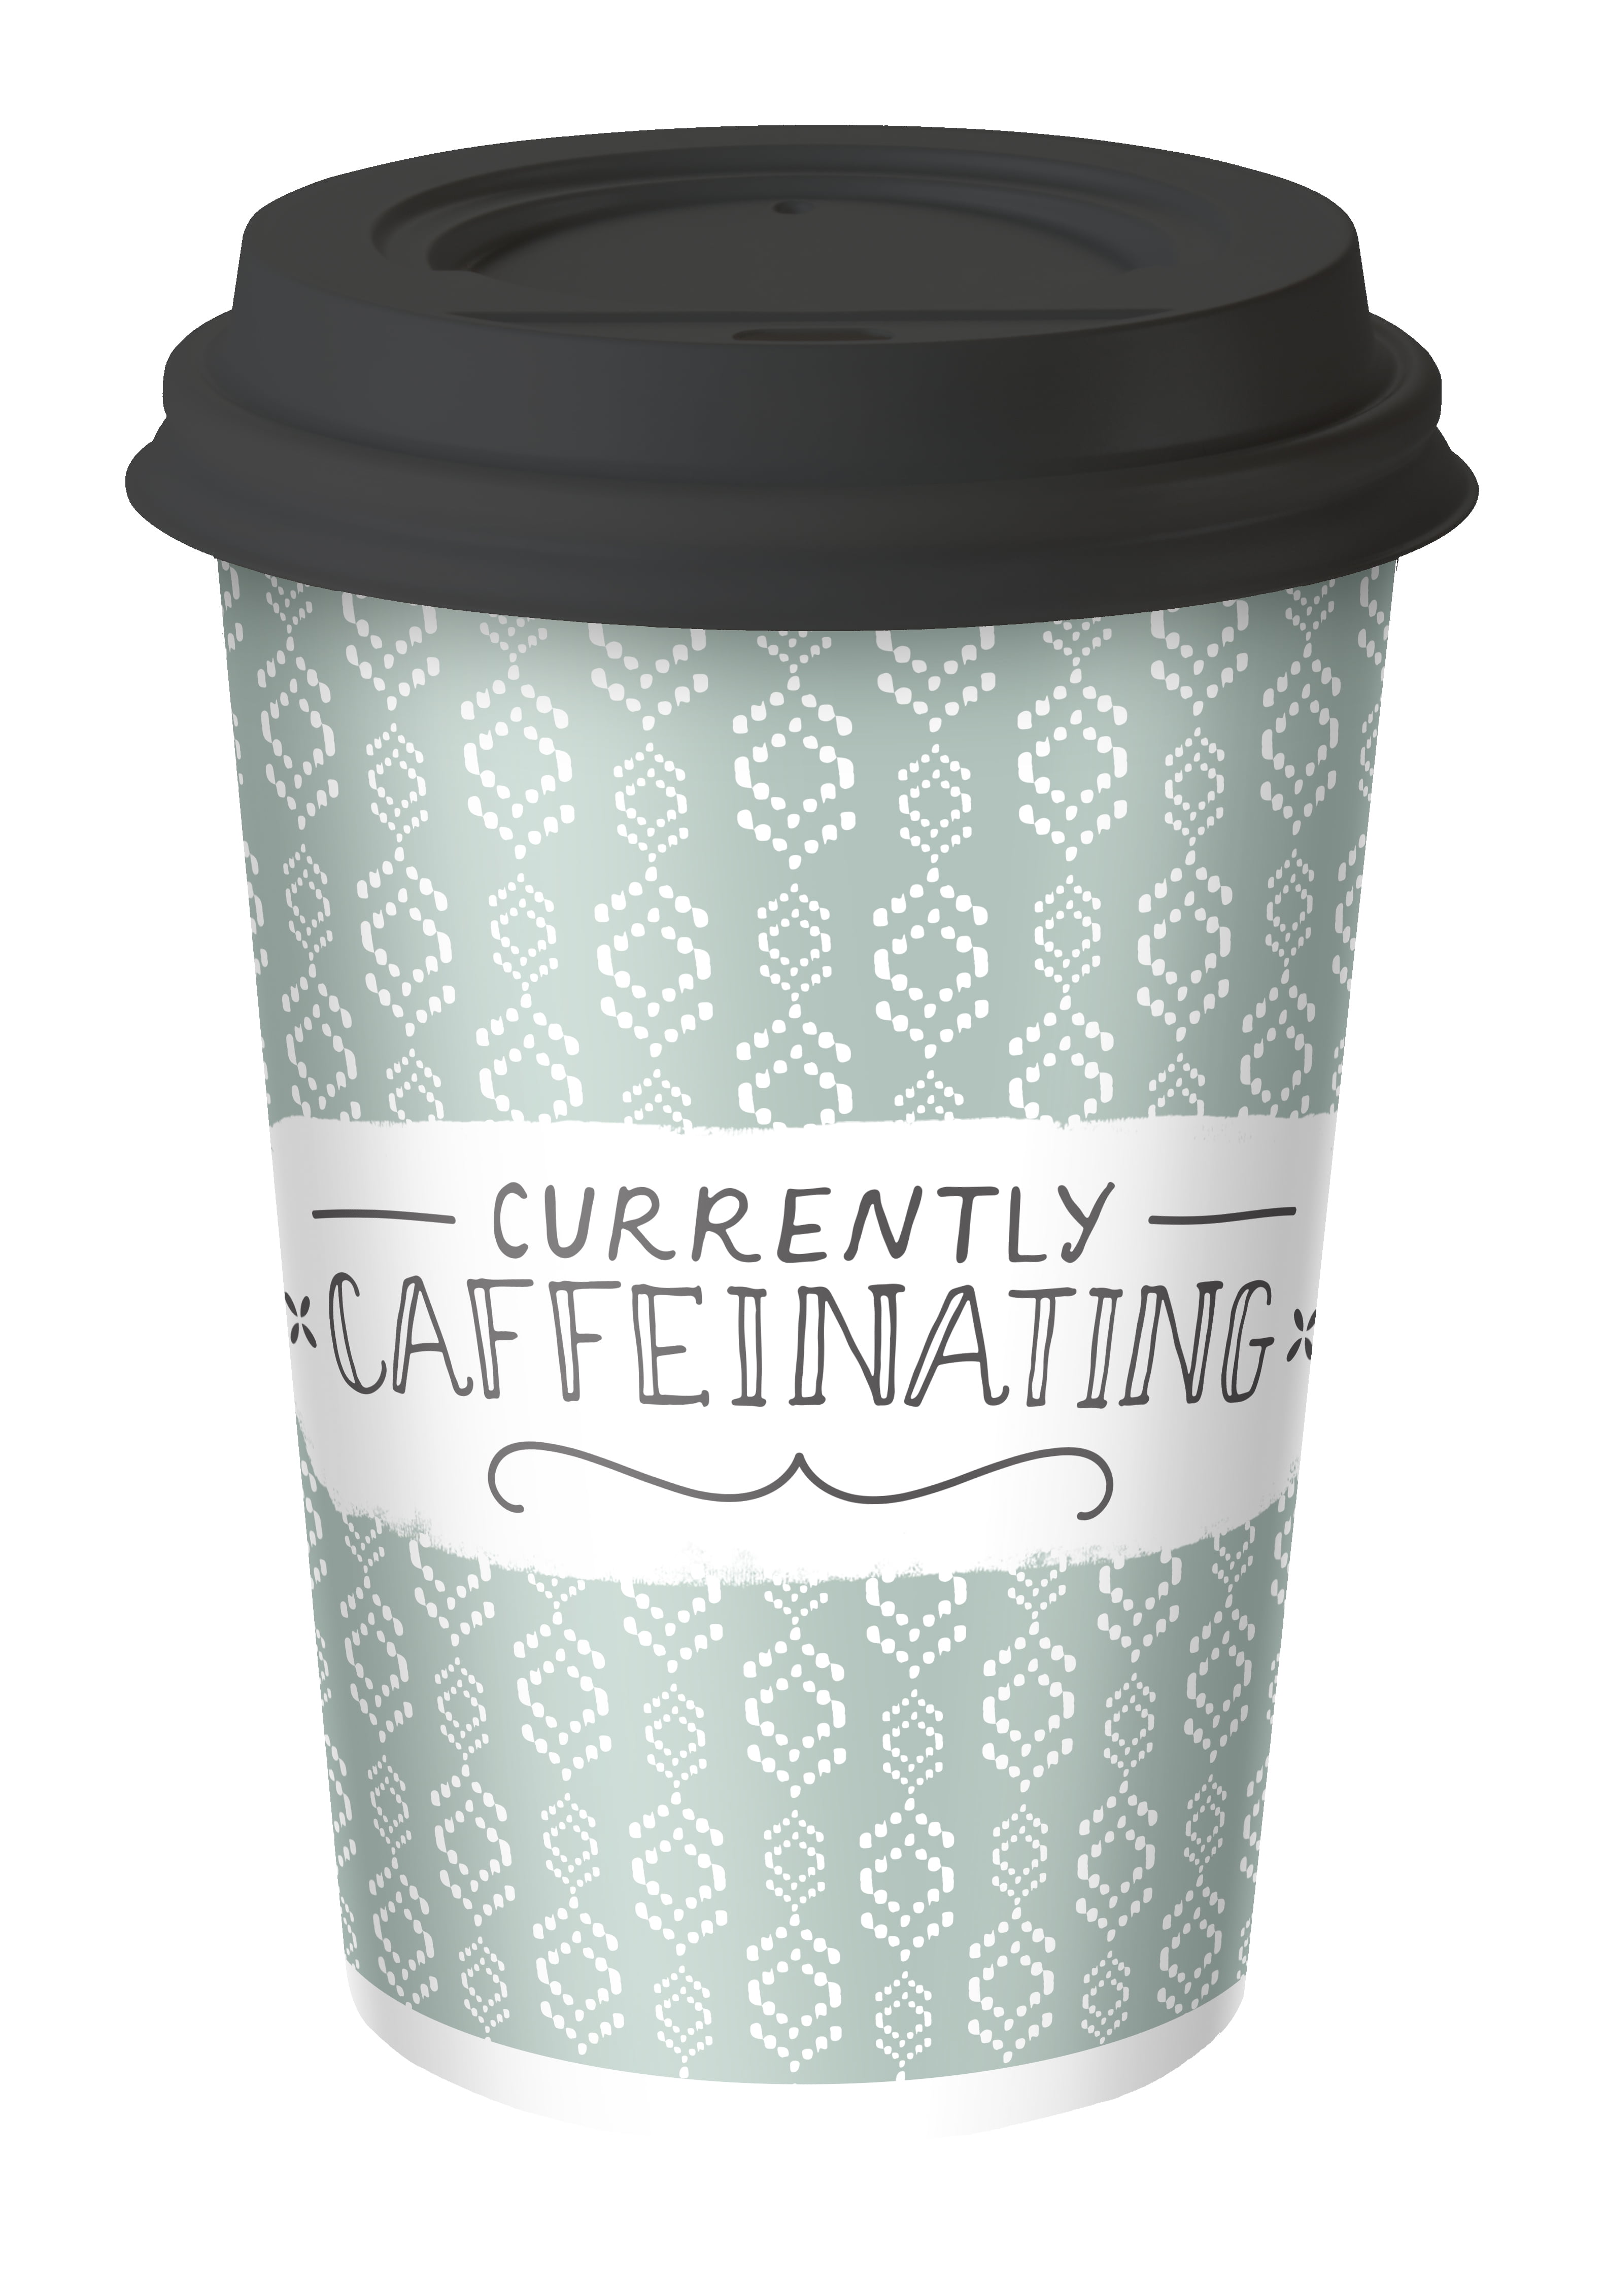 Dixie to Go Holiday Paper Hot Cups, w/ Lids, Limited Edition, 12oz 14ct 